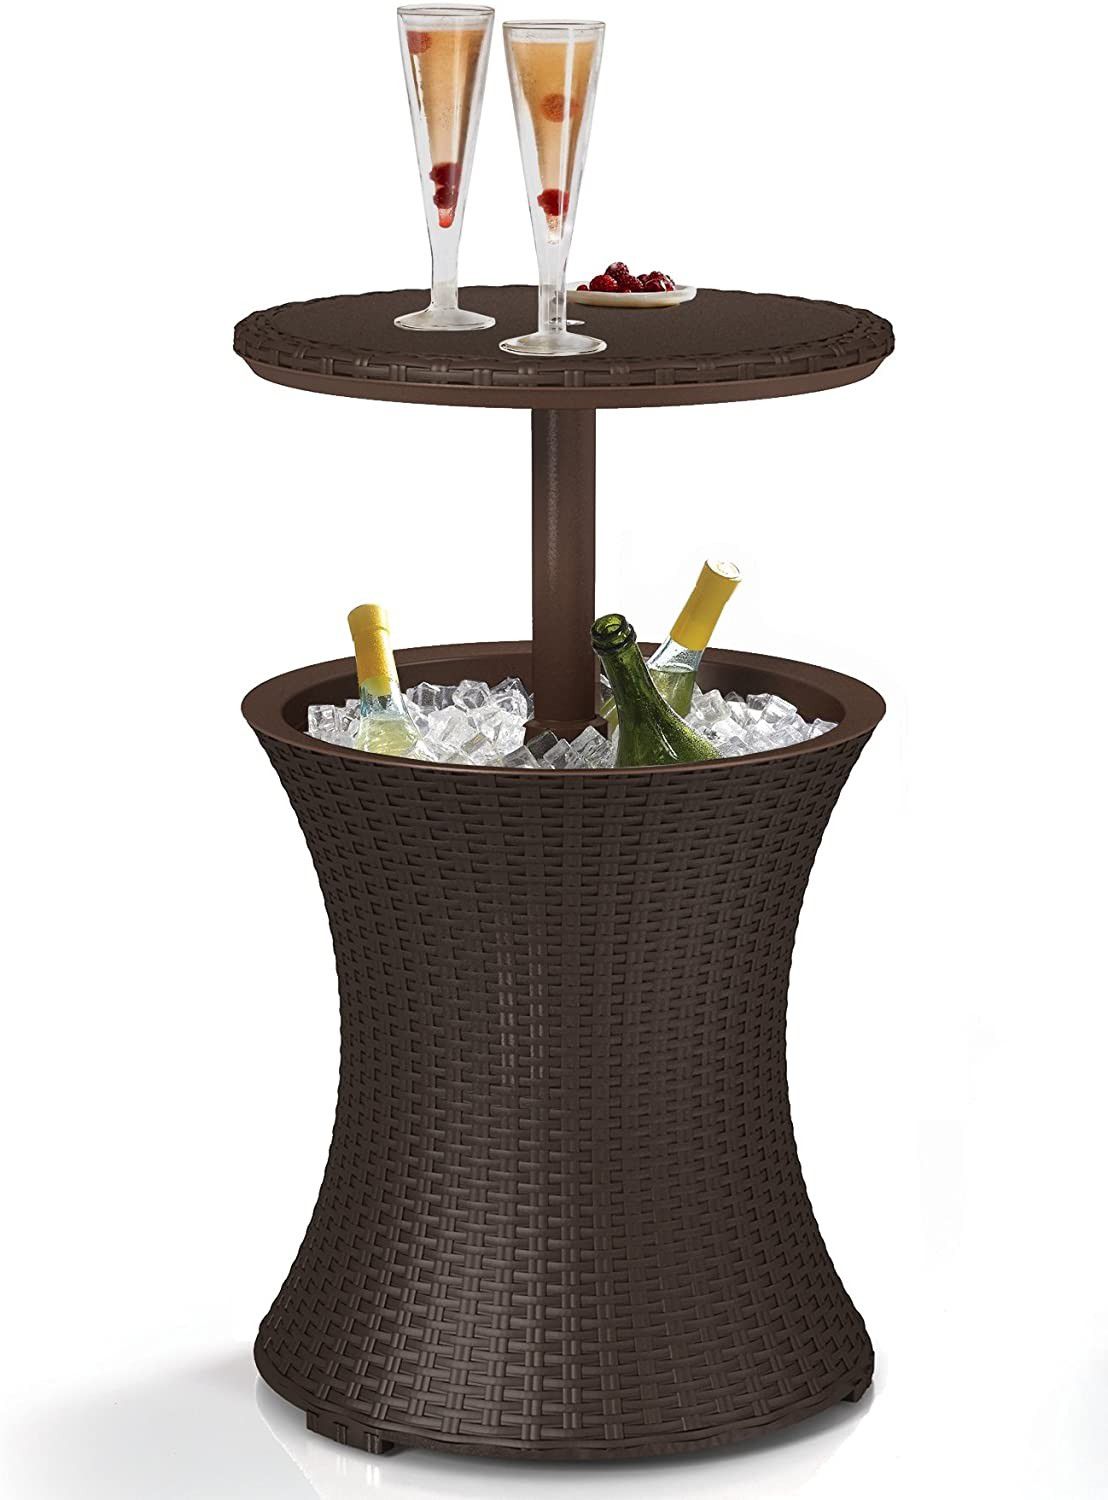 Bar Outdoor Patio Furniture and Hot Tub Side Table with 7.5 Gallon Beer and Wine Cooler, Espresso Brown